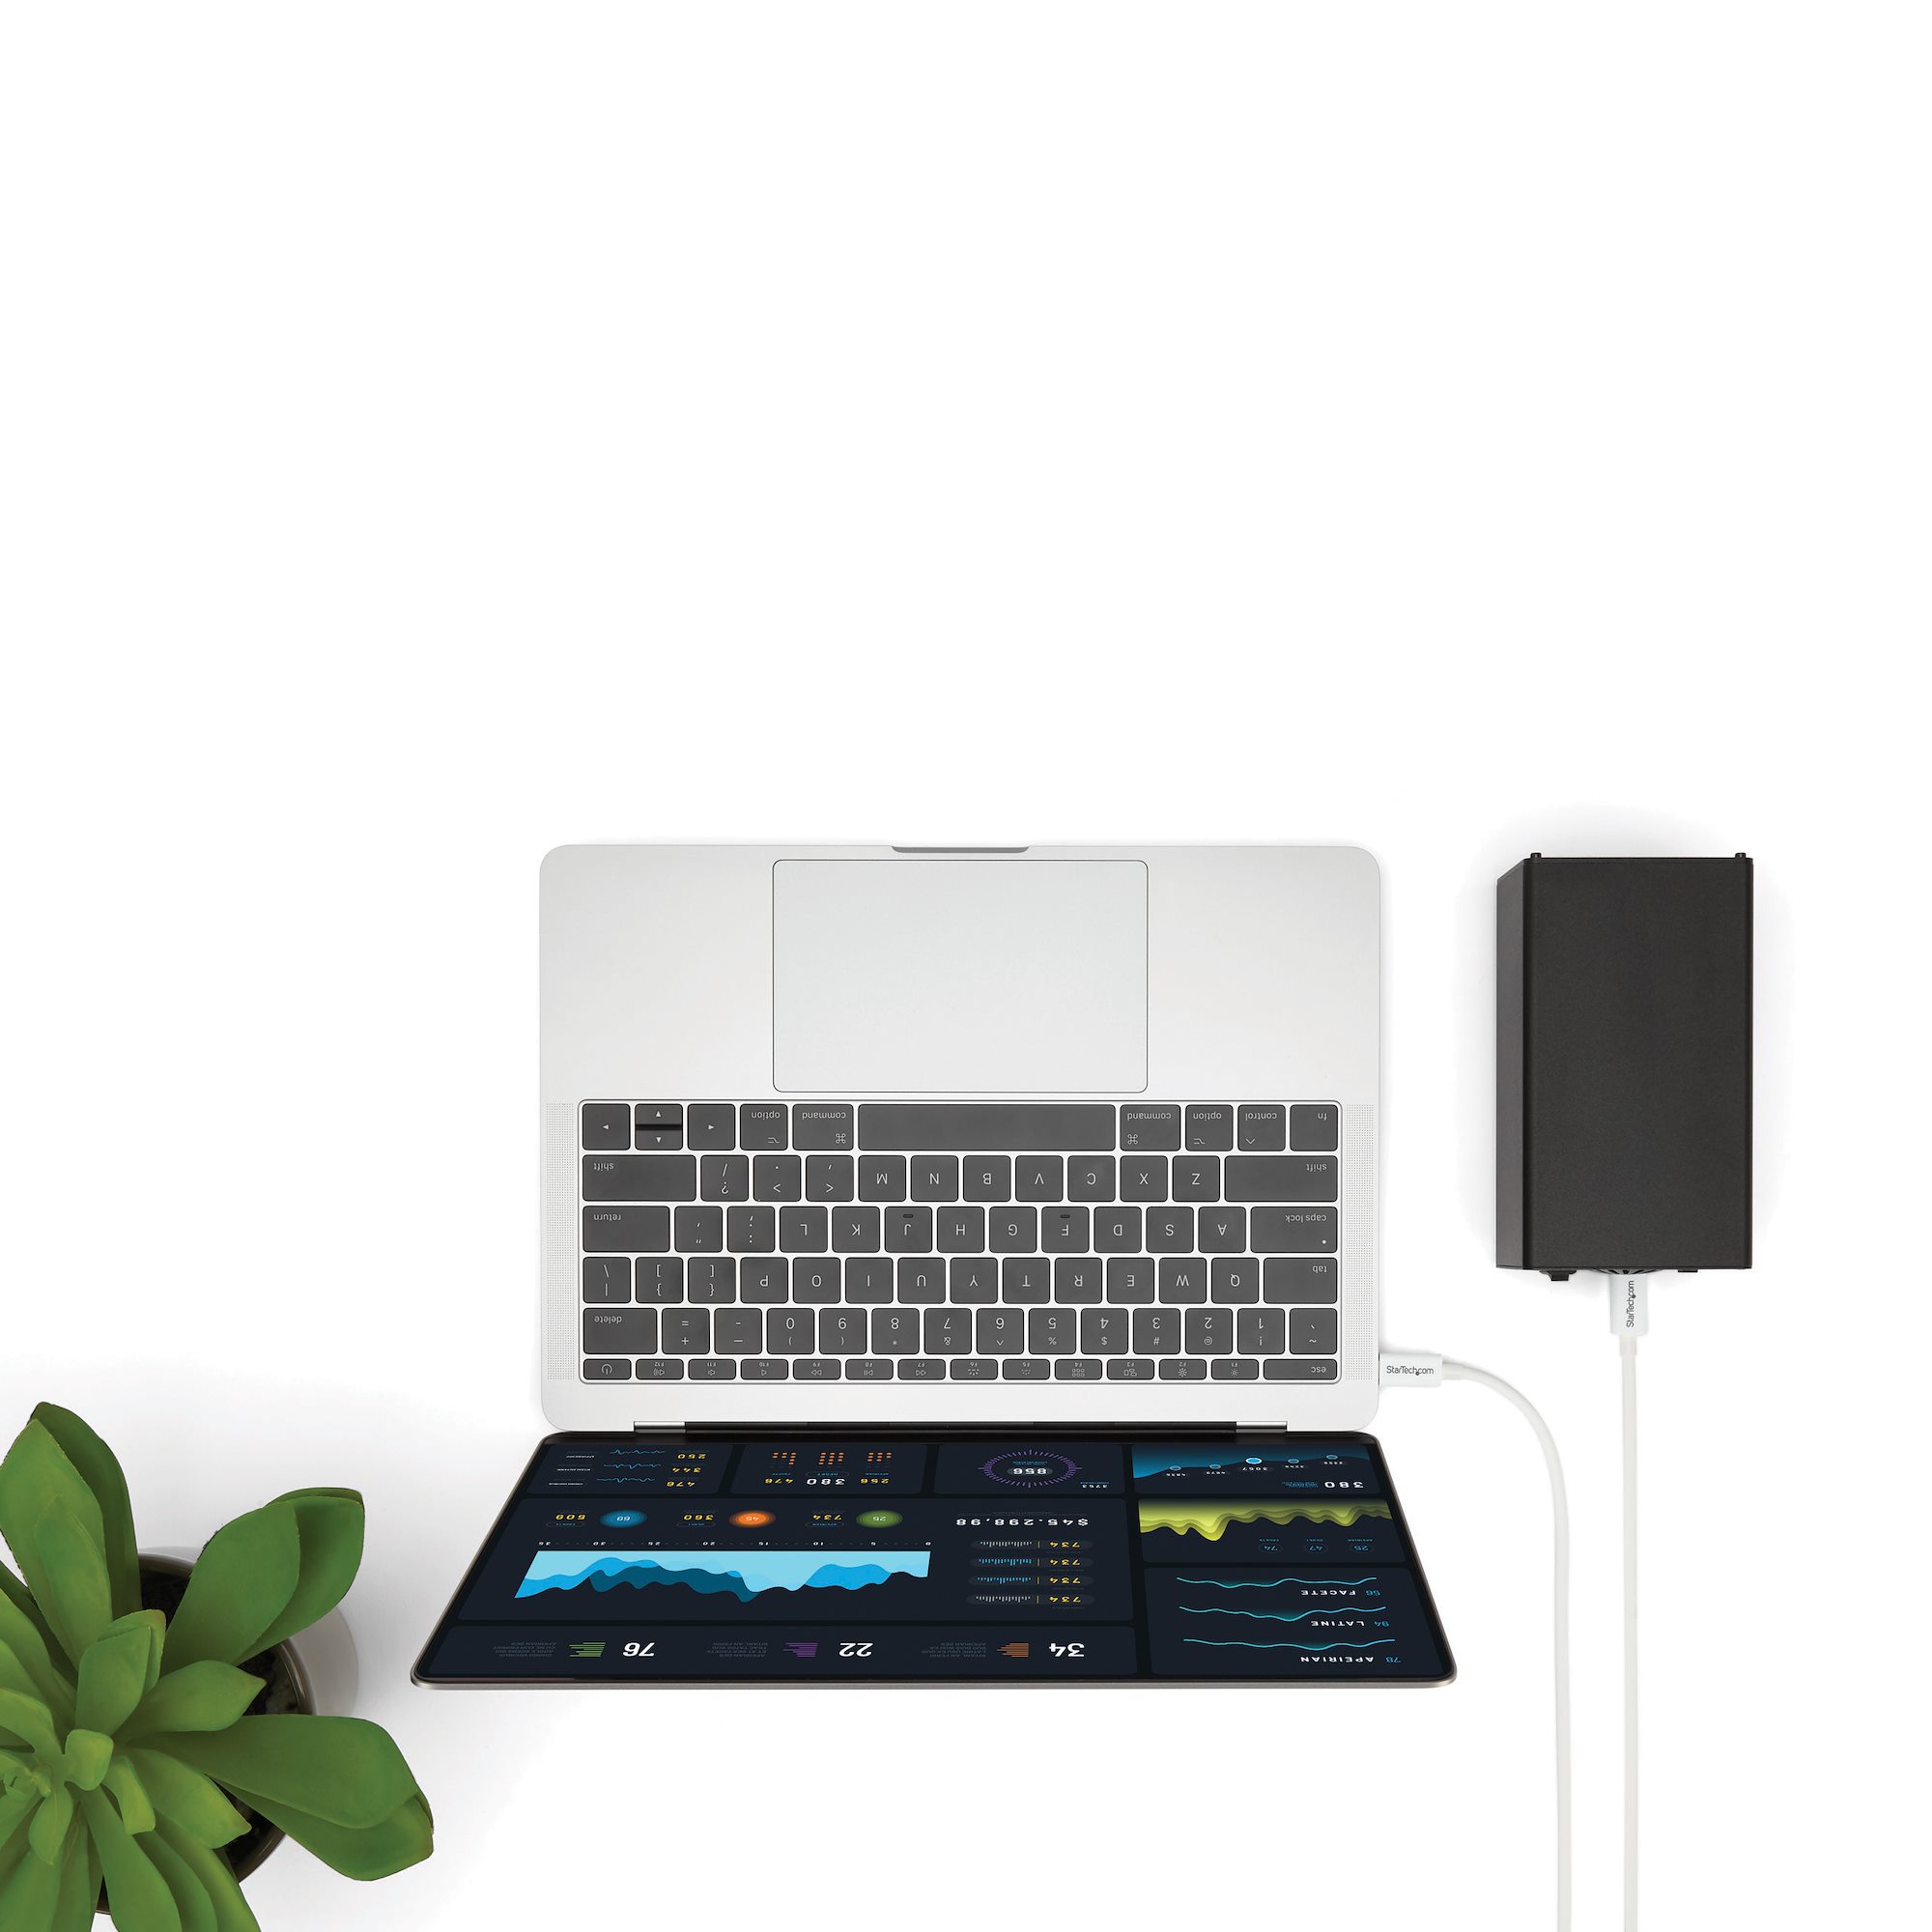 Cable 2m Thunderbolt 3 USB-C 20Gbps - Cables y adaptadores Thunderbolt 3